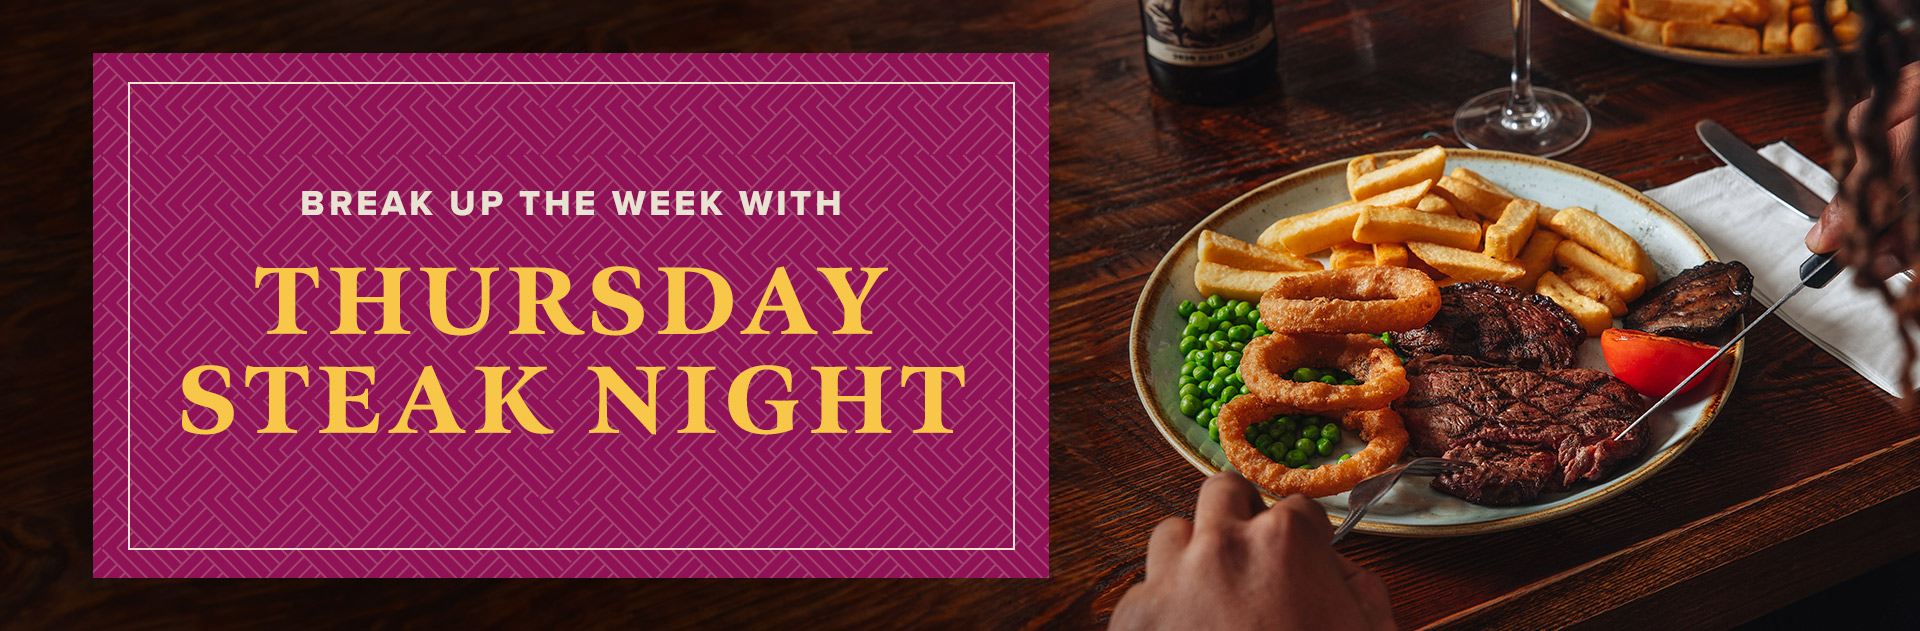 Thursday Steak Night at The Foley Arms